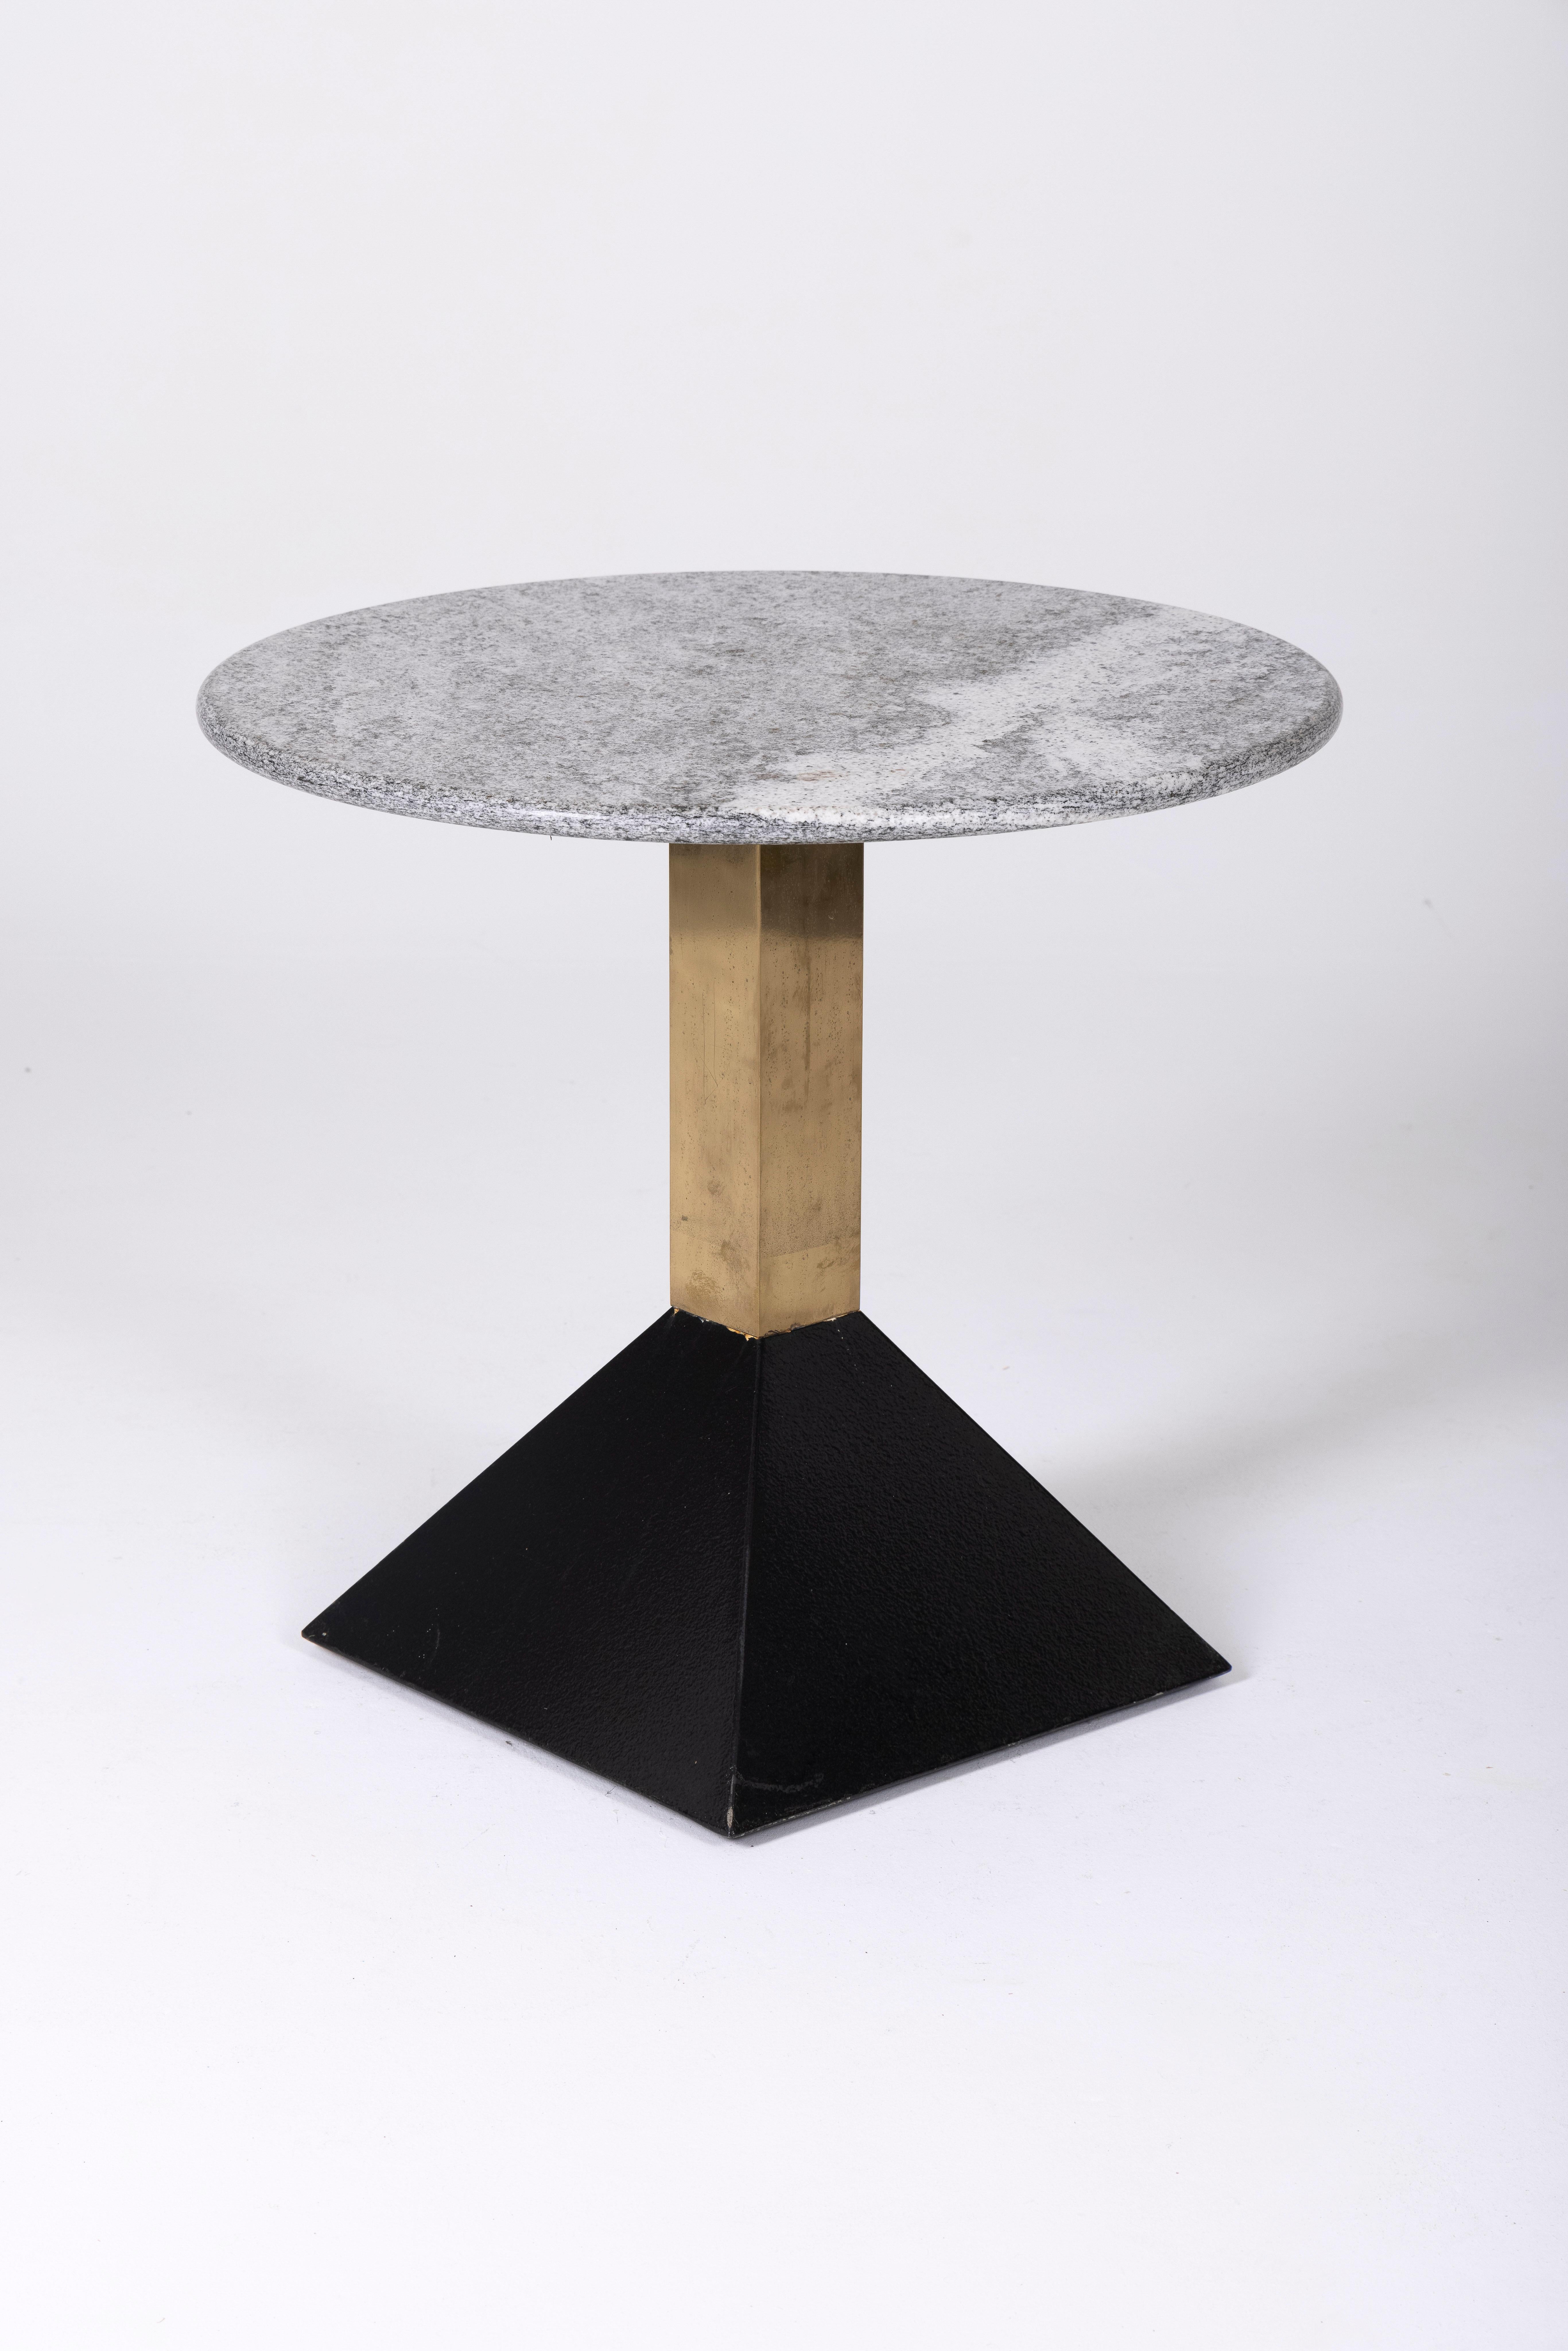 Marble and Brass Side Table from the 1980s. The tabletop is gray marble, and the base is made of black lacquered metal and brass. This end table complements Memphis-style furniture.
DV148